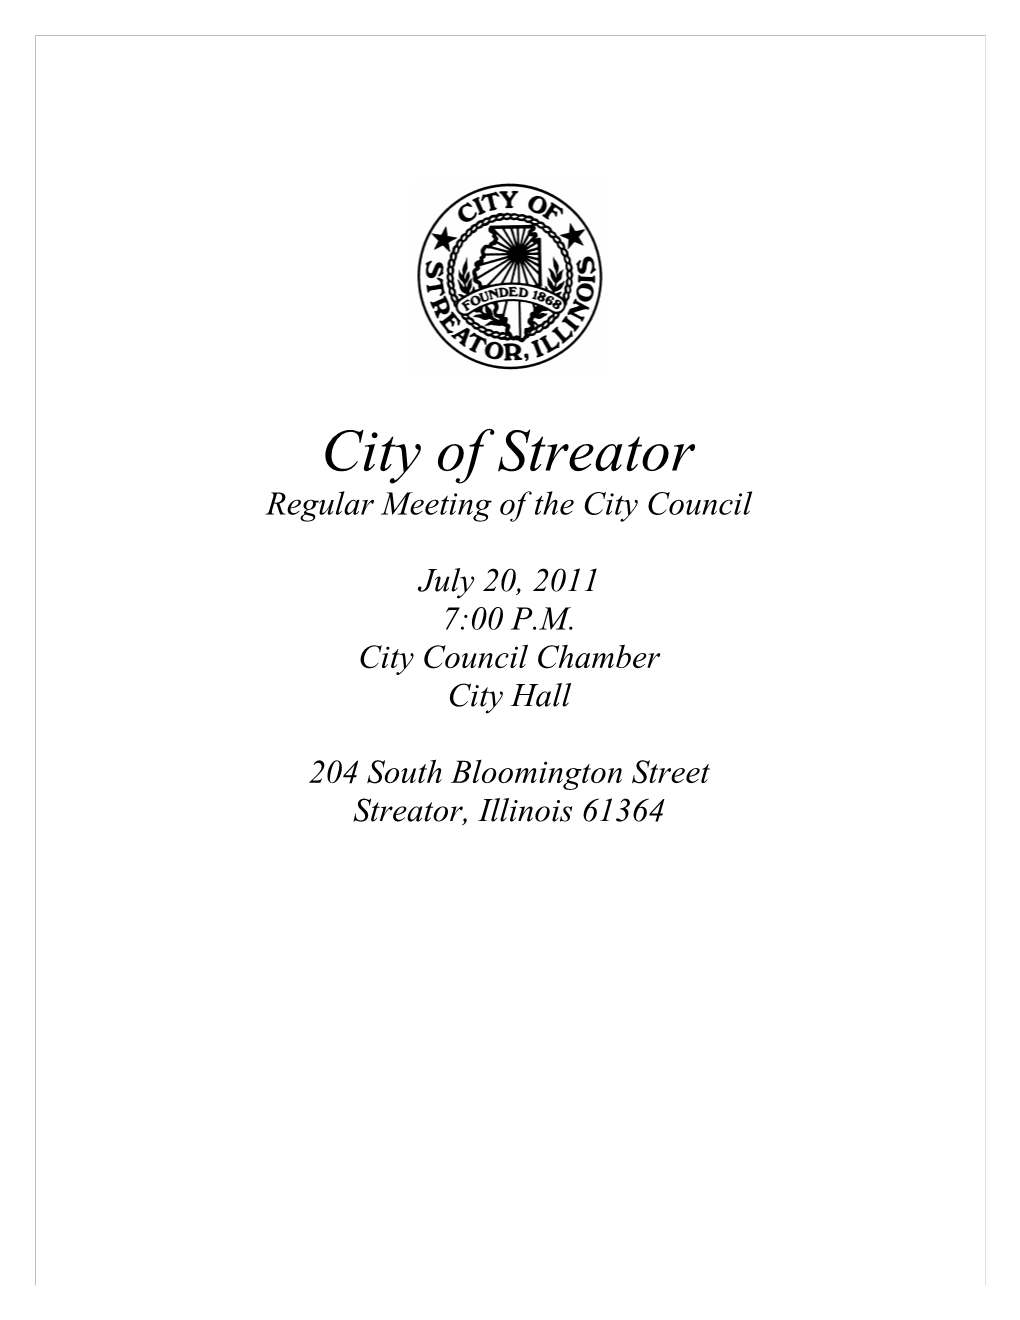 City of Streator Regular Meeting of the City Council